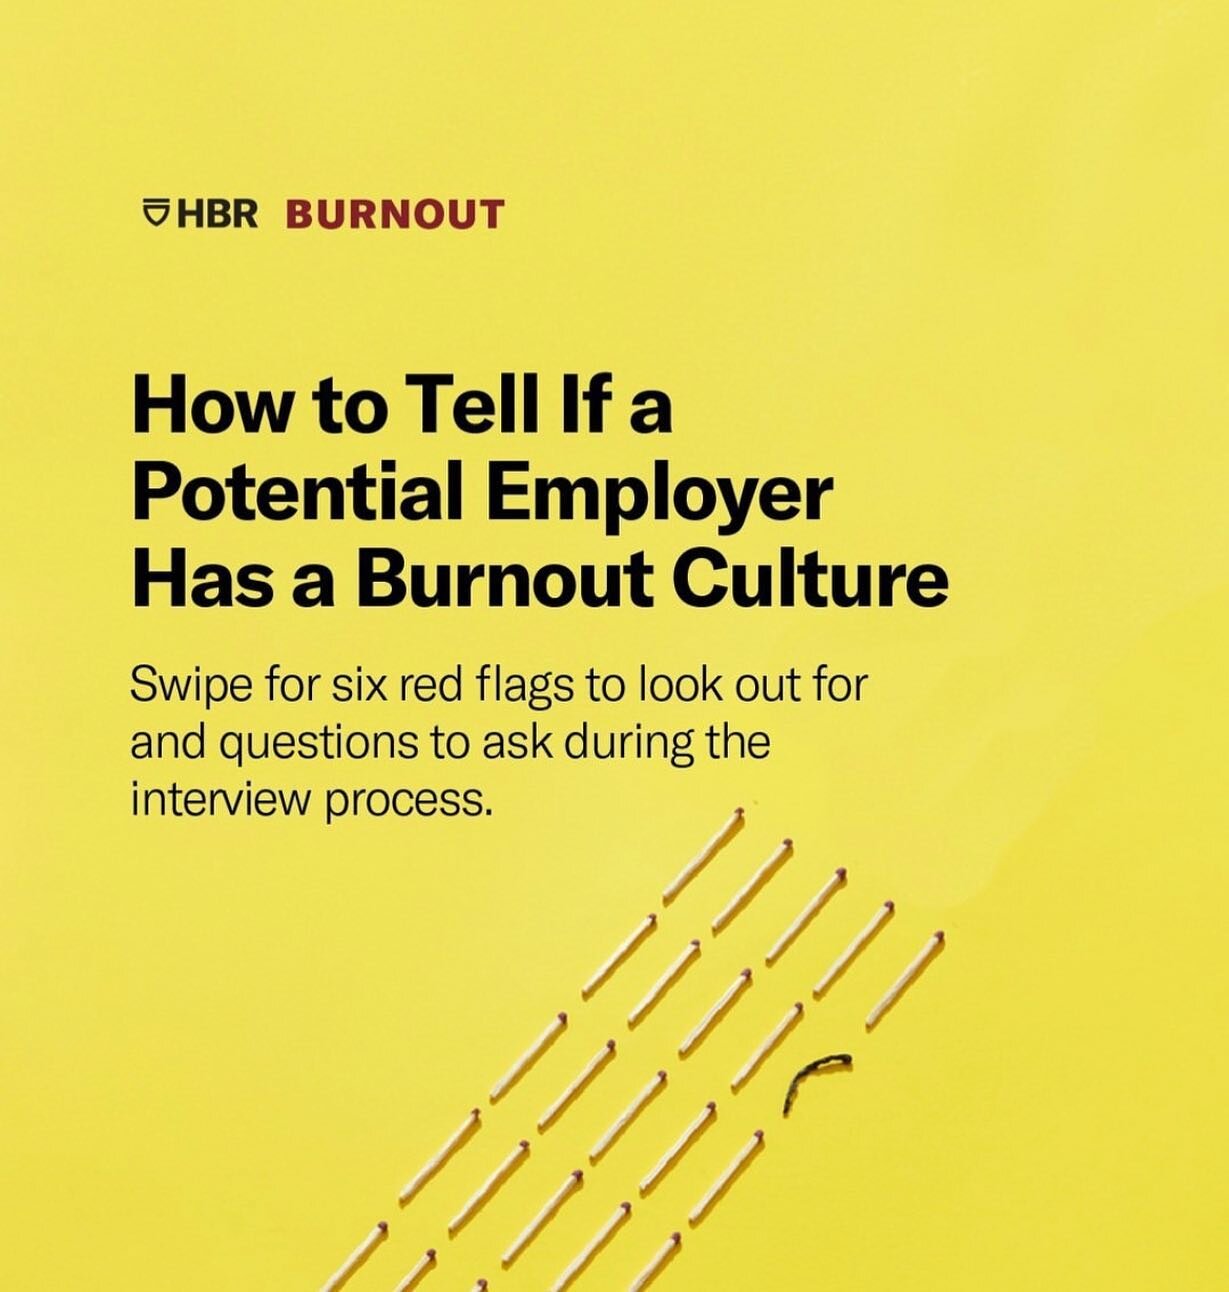 Whether we identify it as such or not, many of us have known burnout. But it is there a way to avoid burnout culture? 🤔🤔

According to Harvard Business Review, there are six signs to look for during the interview process&mdash; and specific questio